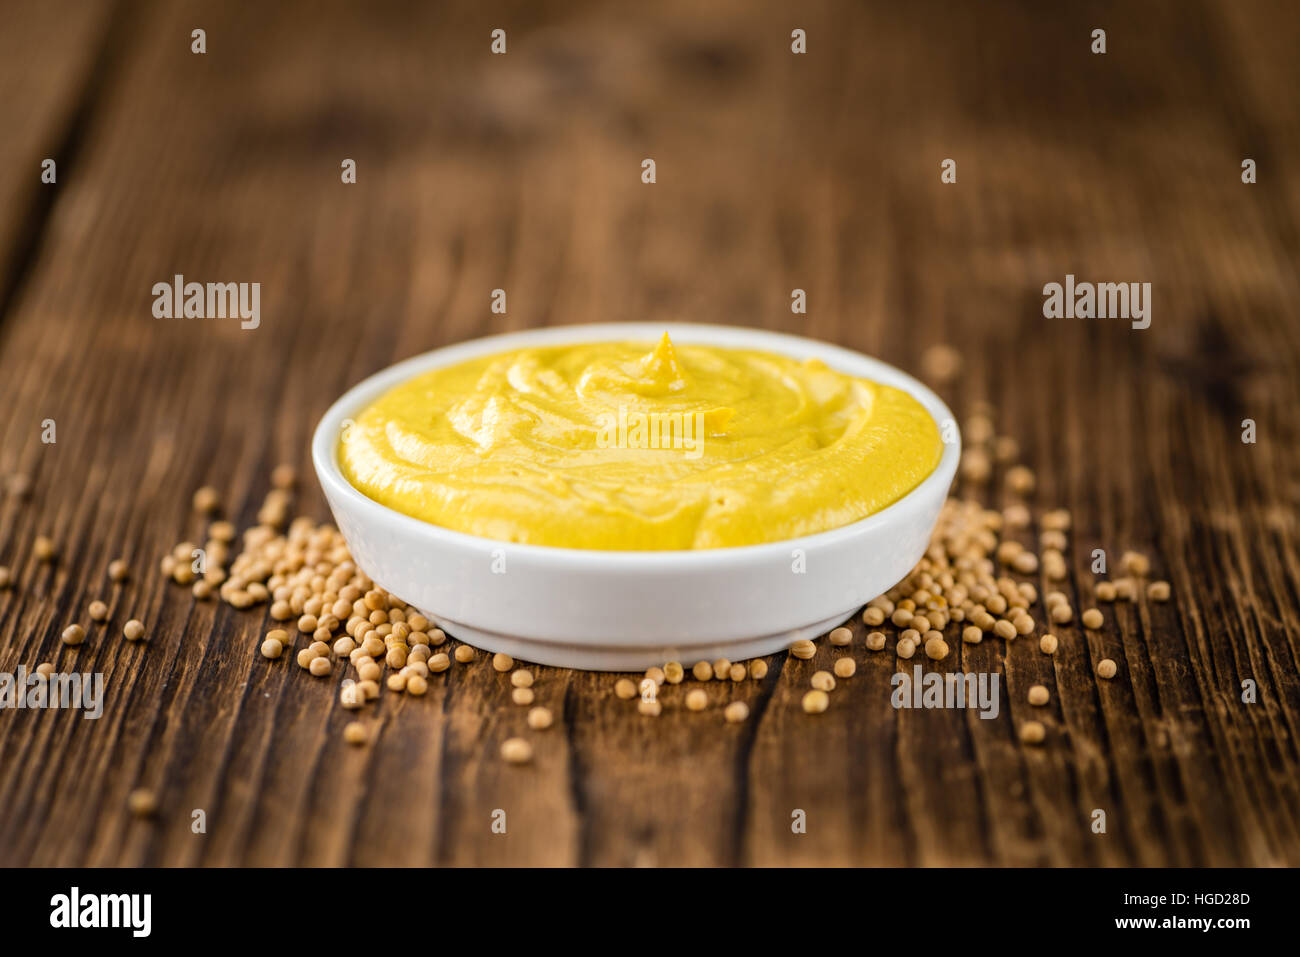 Portion of homemade Mustard on wooden background (selective focus; close-up shot) Stock Photo